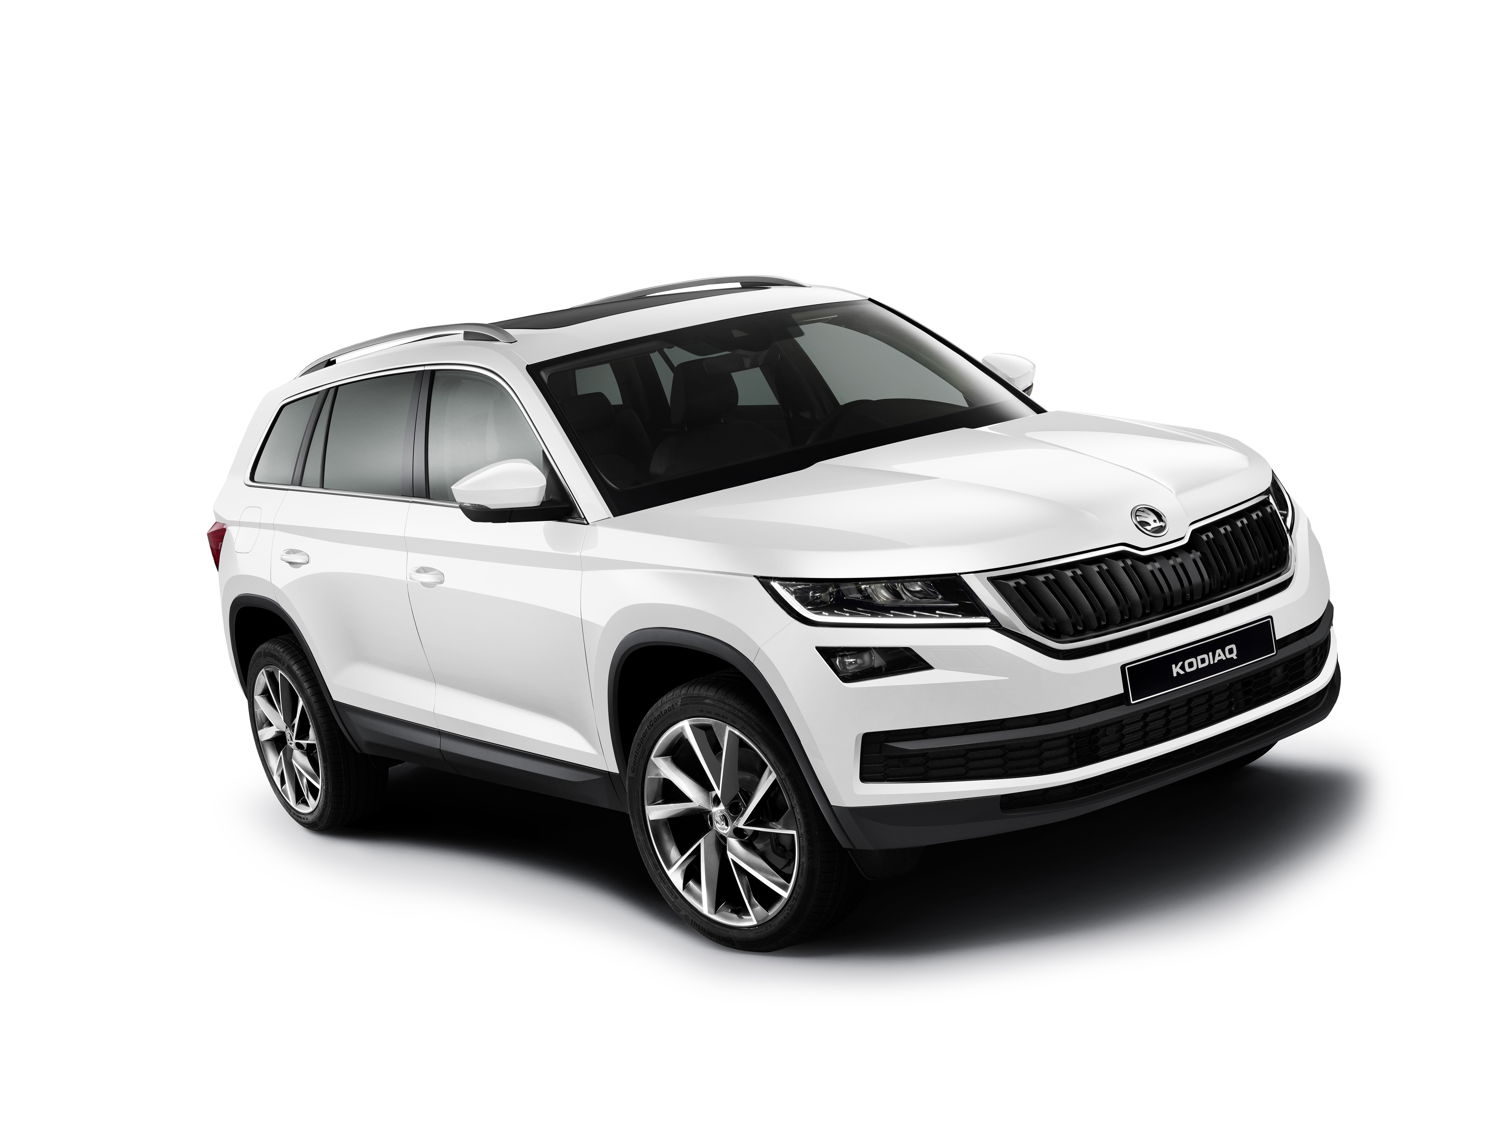 ŠKODA’s deliveries increased by 2.4% to 99,000 units in May (May 2016: 96,700 vehicles), making it the best May in the company’s history. The traditional Czech brand made significant gains, particularly in Europe and India. The ŠKODA KODIAQ (photo) – the brand’s first new SUV model – has been successfully launched on the markets; 7500 units were delivered to customers in May.